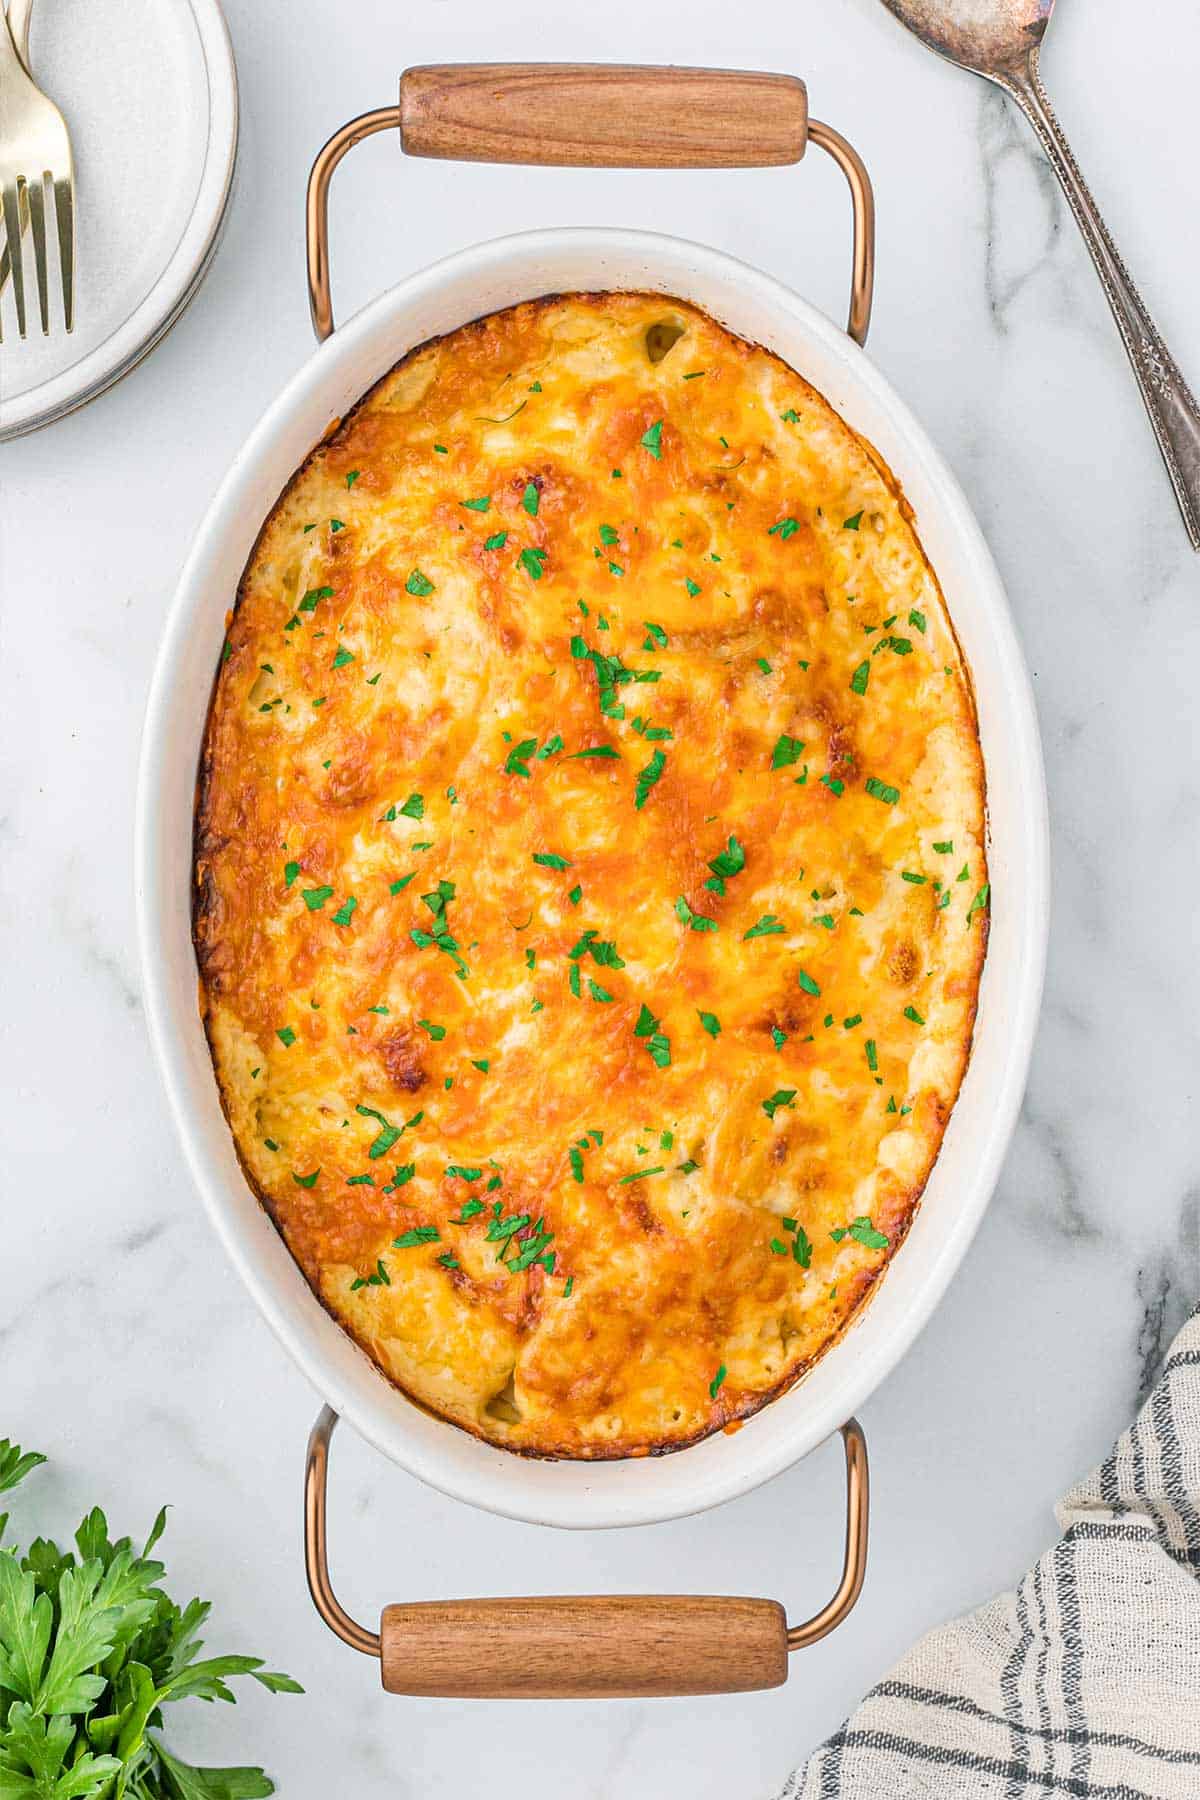 Cheesy scalloped potatoes in an oval casserole dish baked and ready to serve.